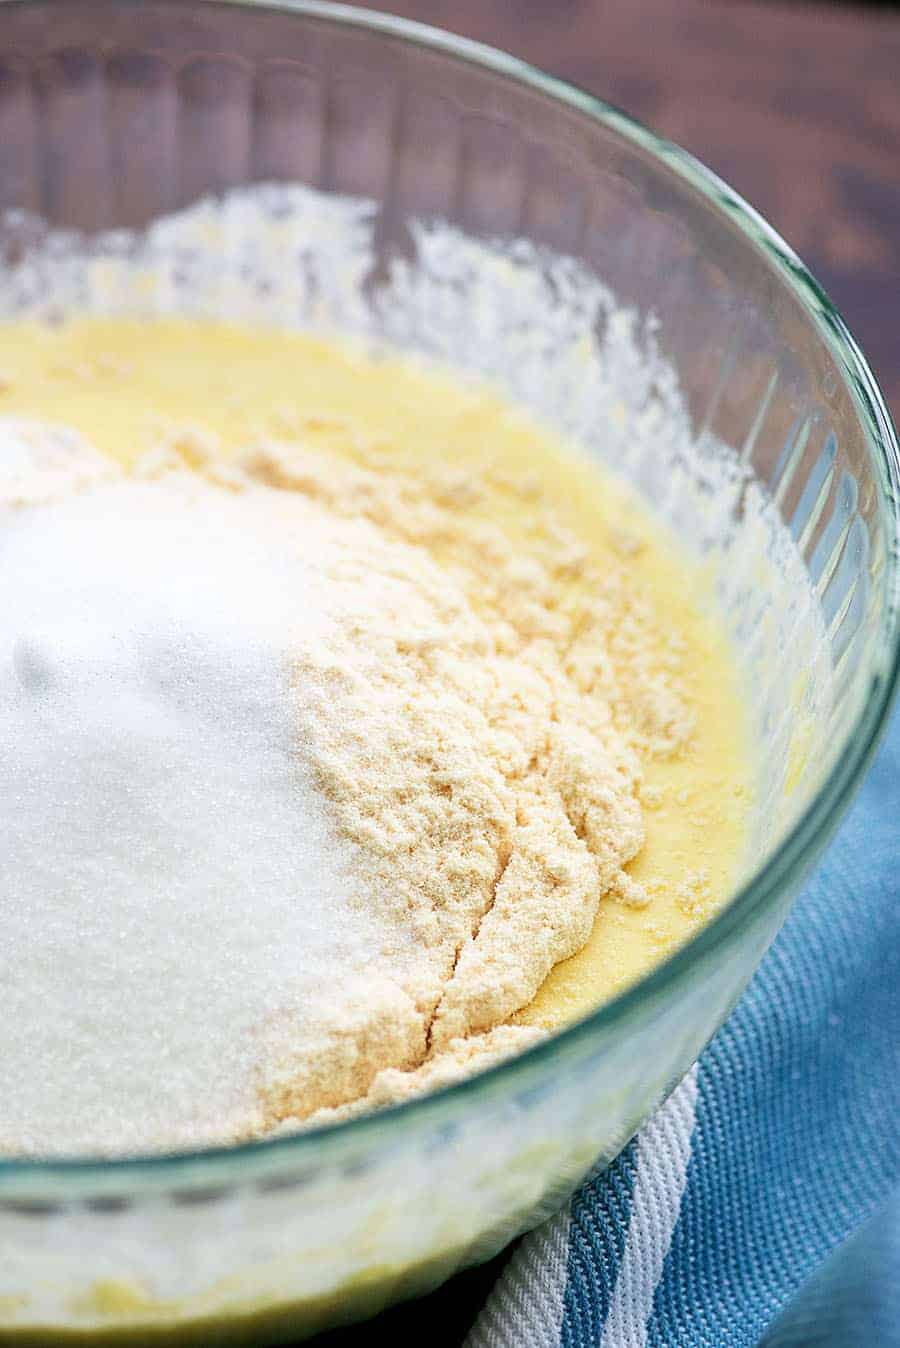 low carb cake batter ingredients in a glass bowl